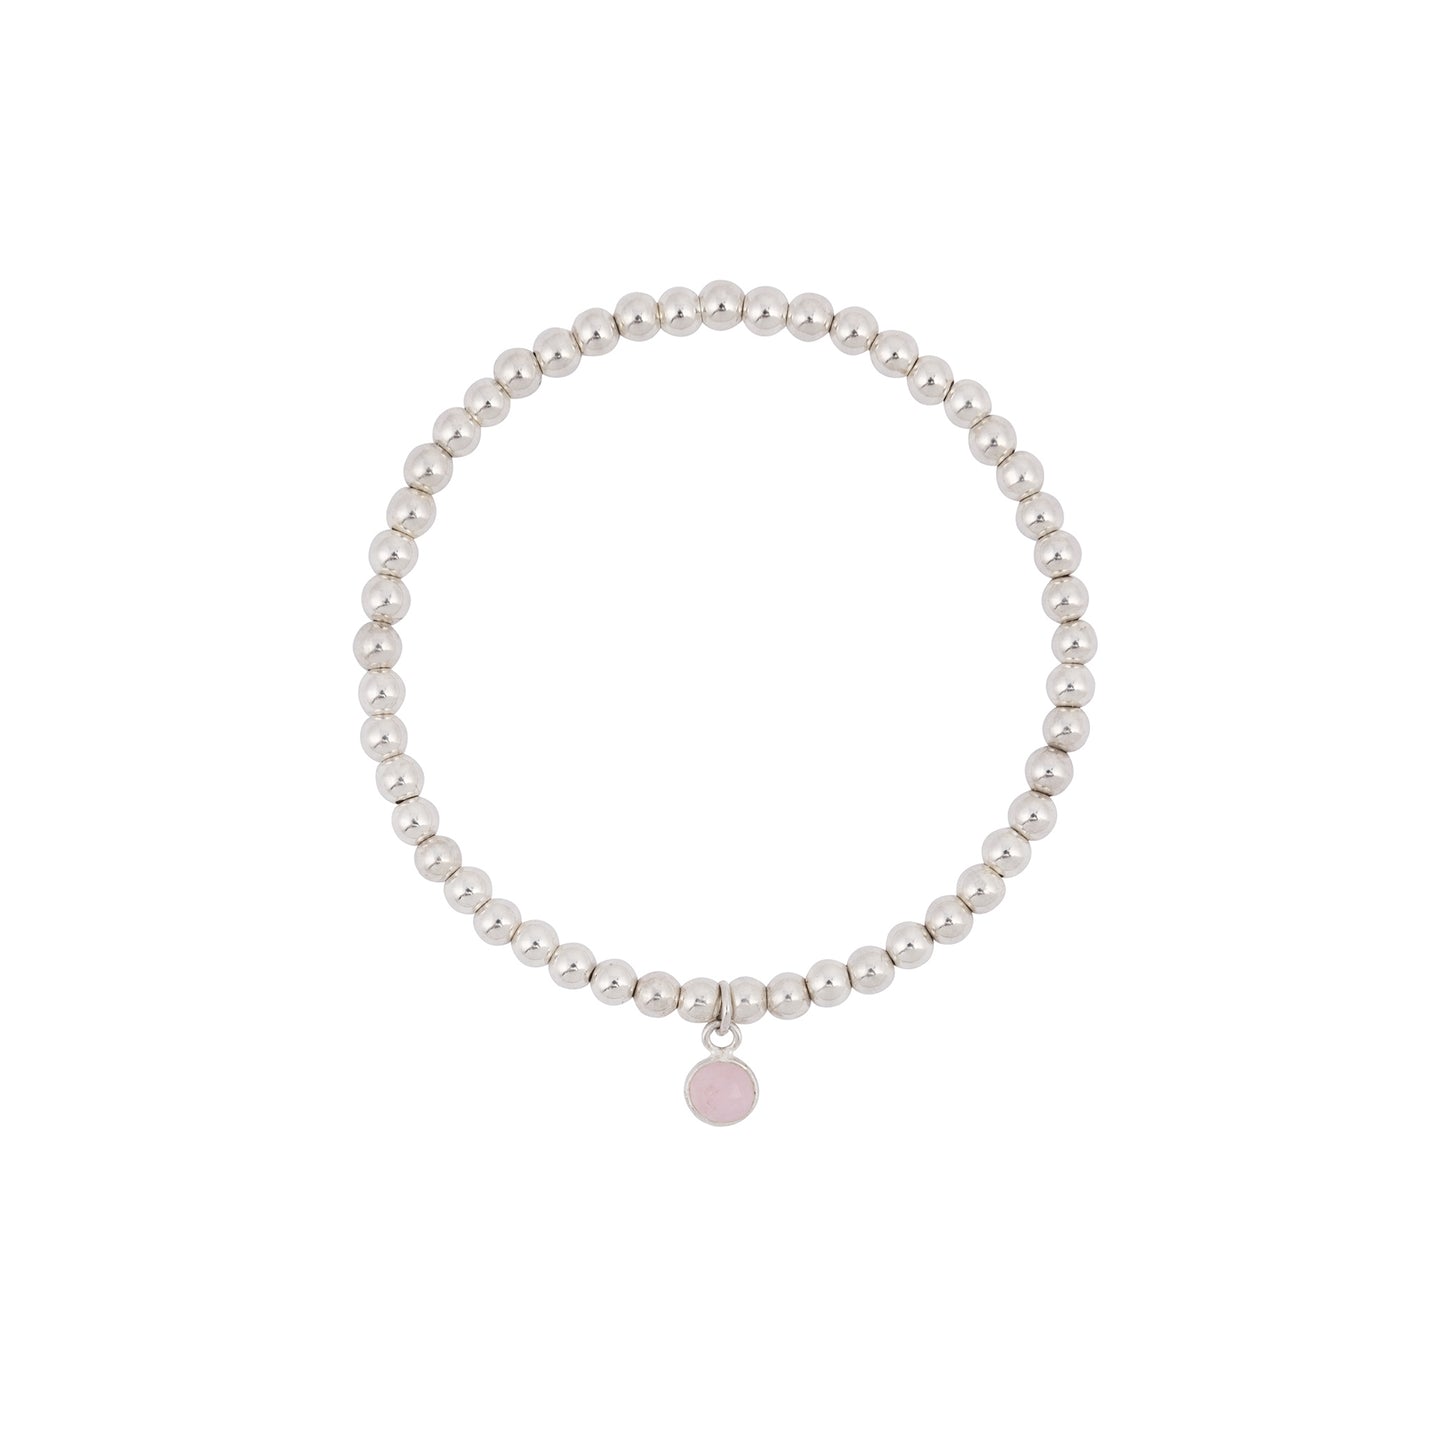 A silver beaded stretch bracelet with a small, round pink rose quartz charm hanging from it. The handcrafted sterling silver "Rose Quartz Charm Bracelet" by Made Here with Love is made of uniformly sized, shiny beads strung together in a circular shape. The pink charm adds a subtle touch of color, making it a perfect gift for loved ones.